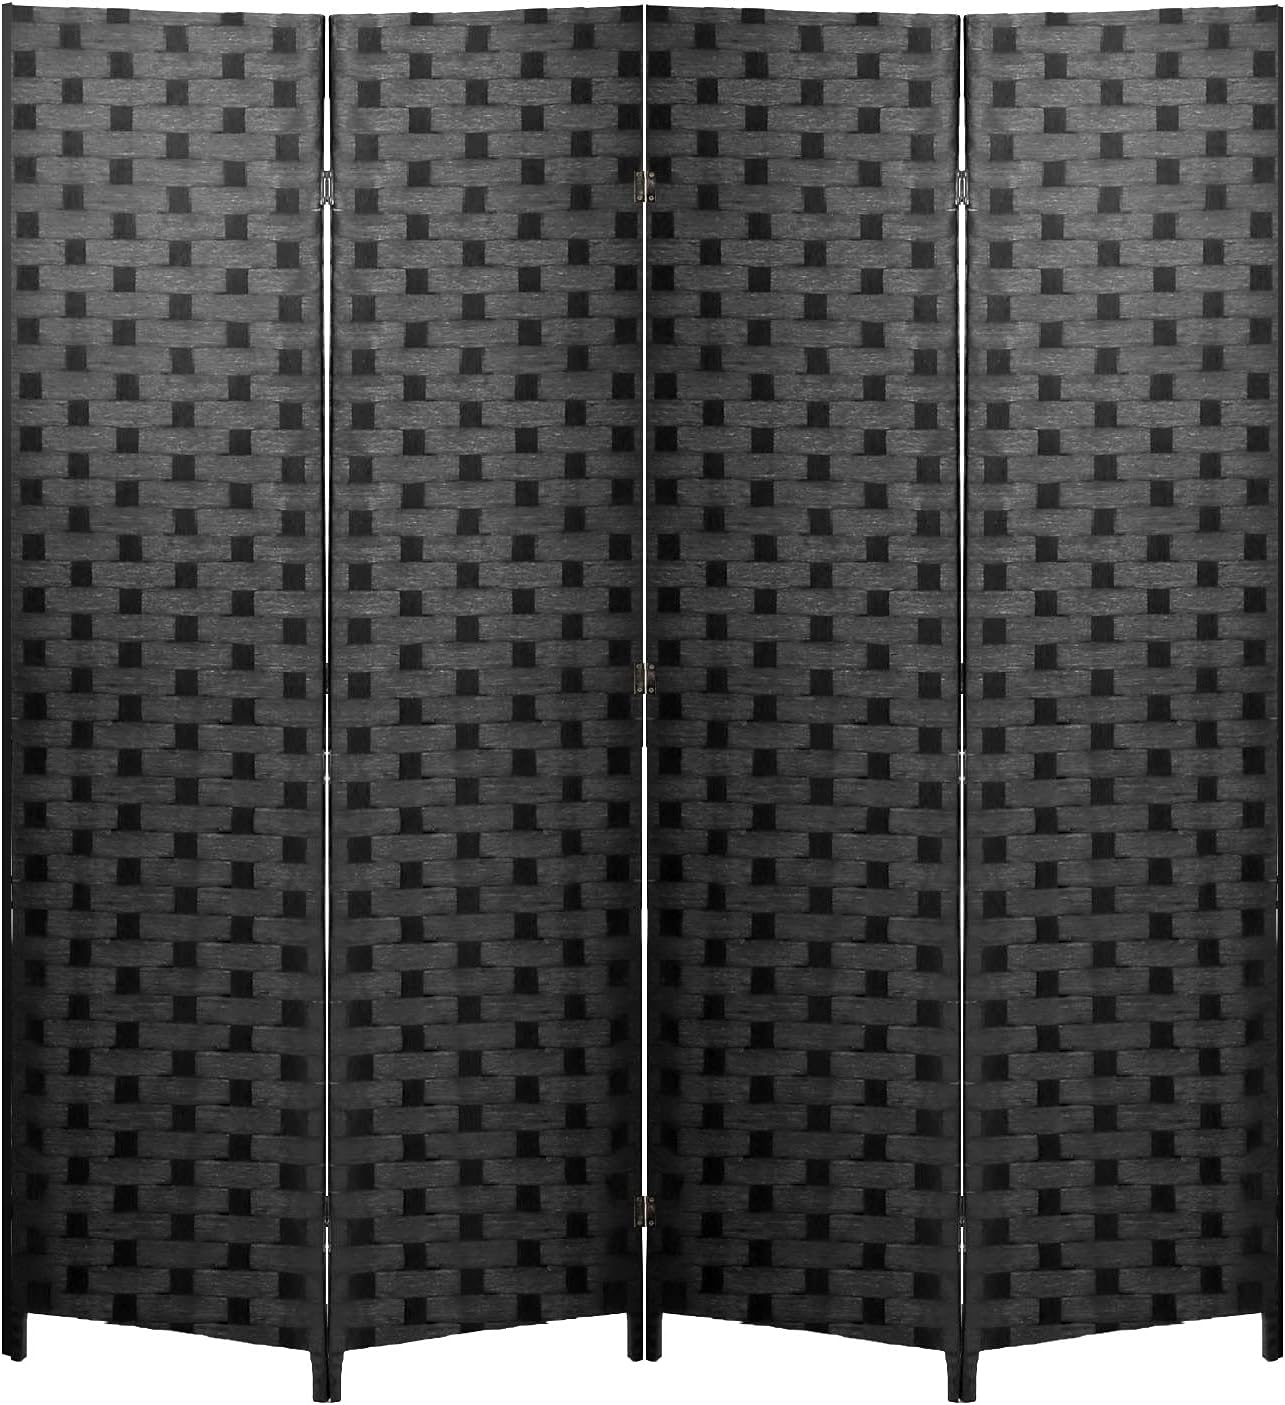 NEW - Room Divider 6FT Wall Divider Wood Screen 4 Panels Wood Mesh Hand-Woven Design Room Screen Divider Indoor Folding Portable Partition Screen,Black - Retail $62